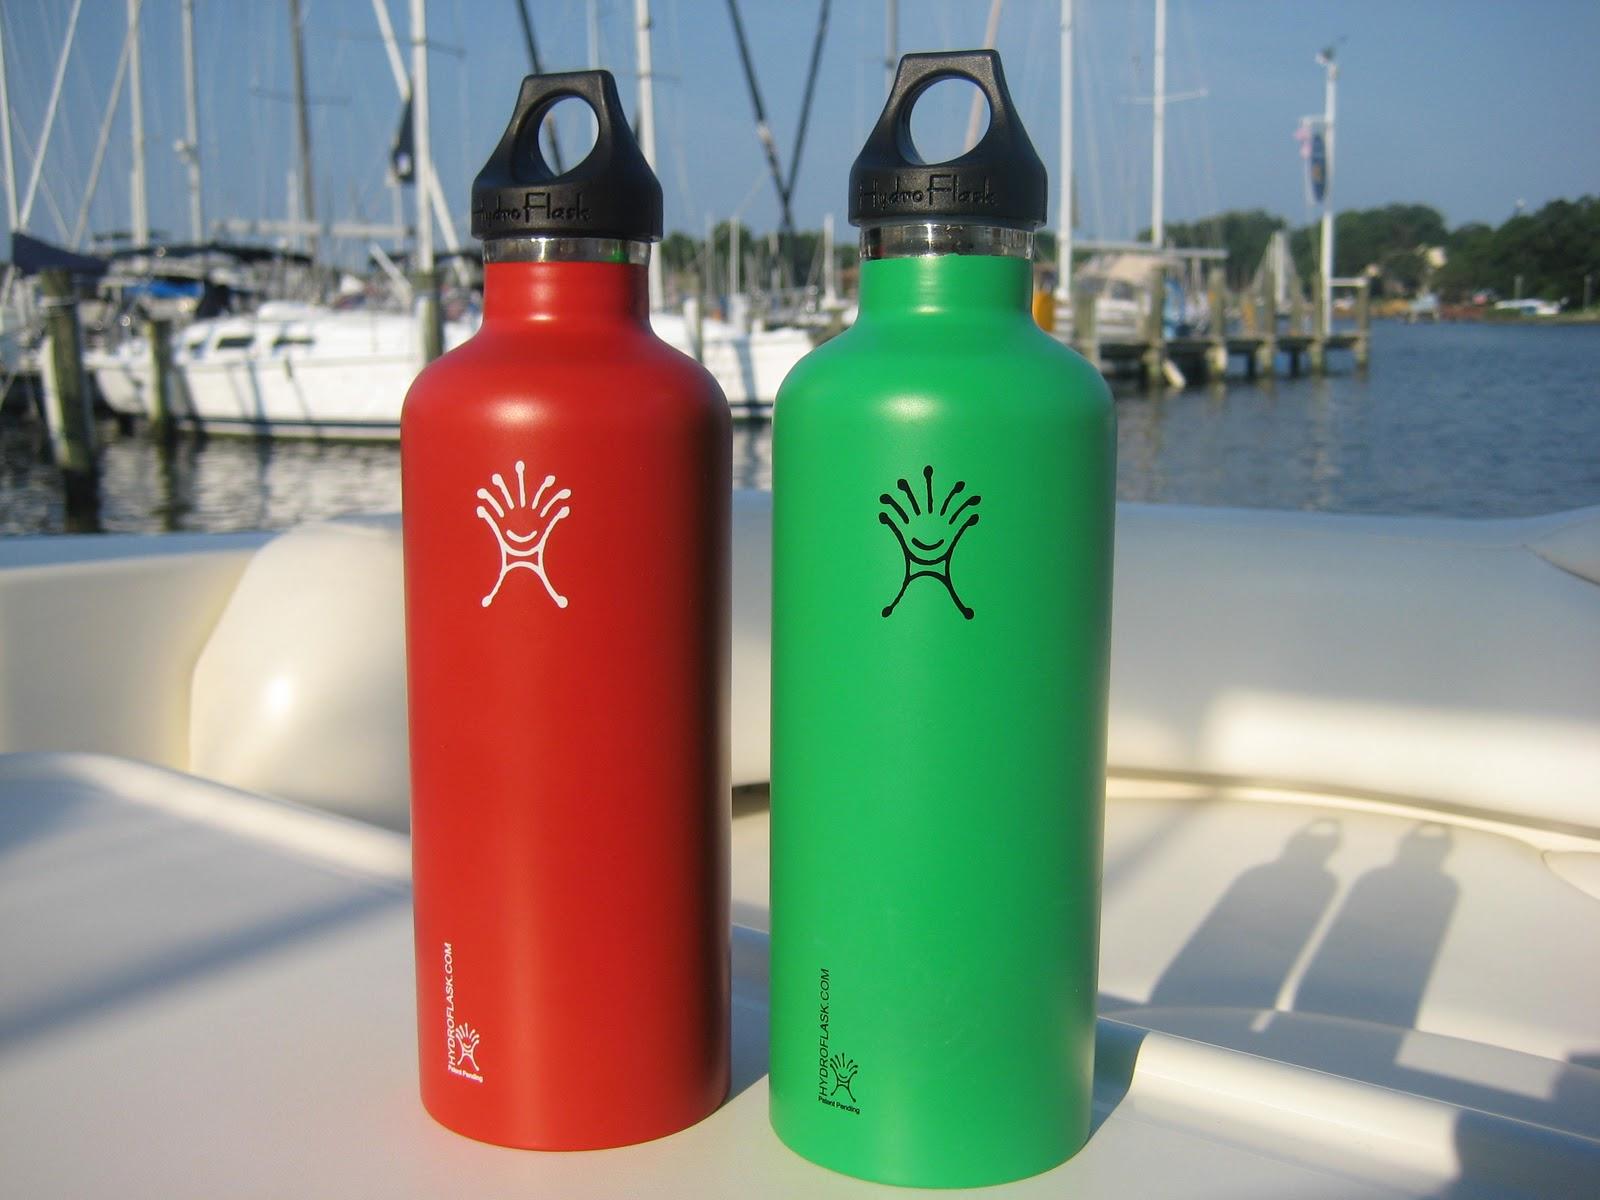 Hydro Flask Insulated Water Bottle Review. My Boat Life